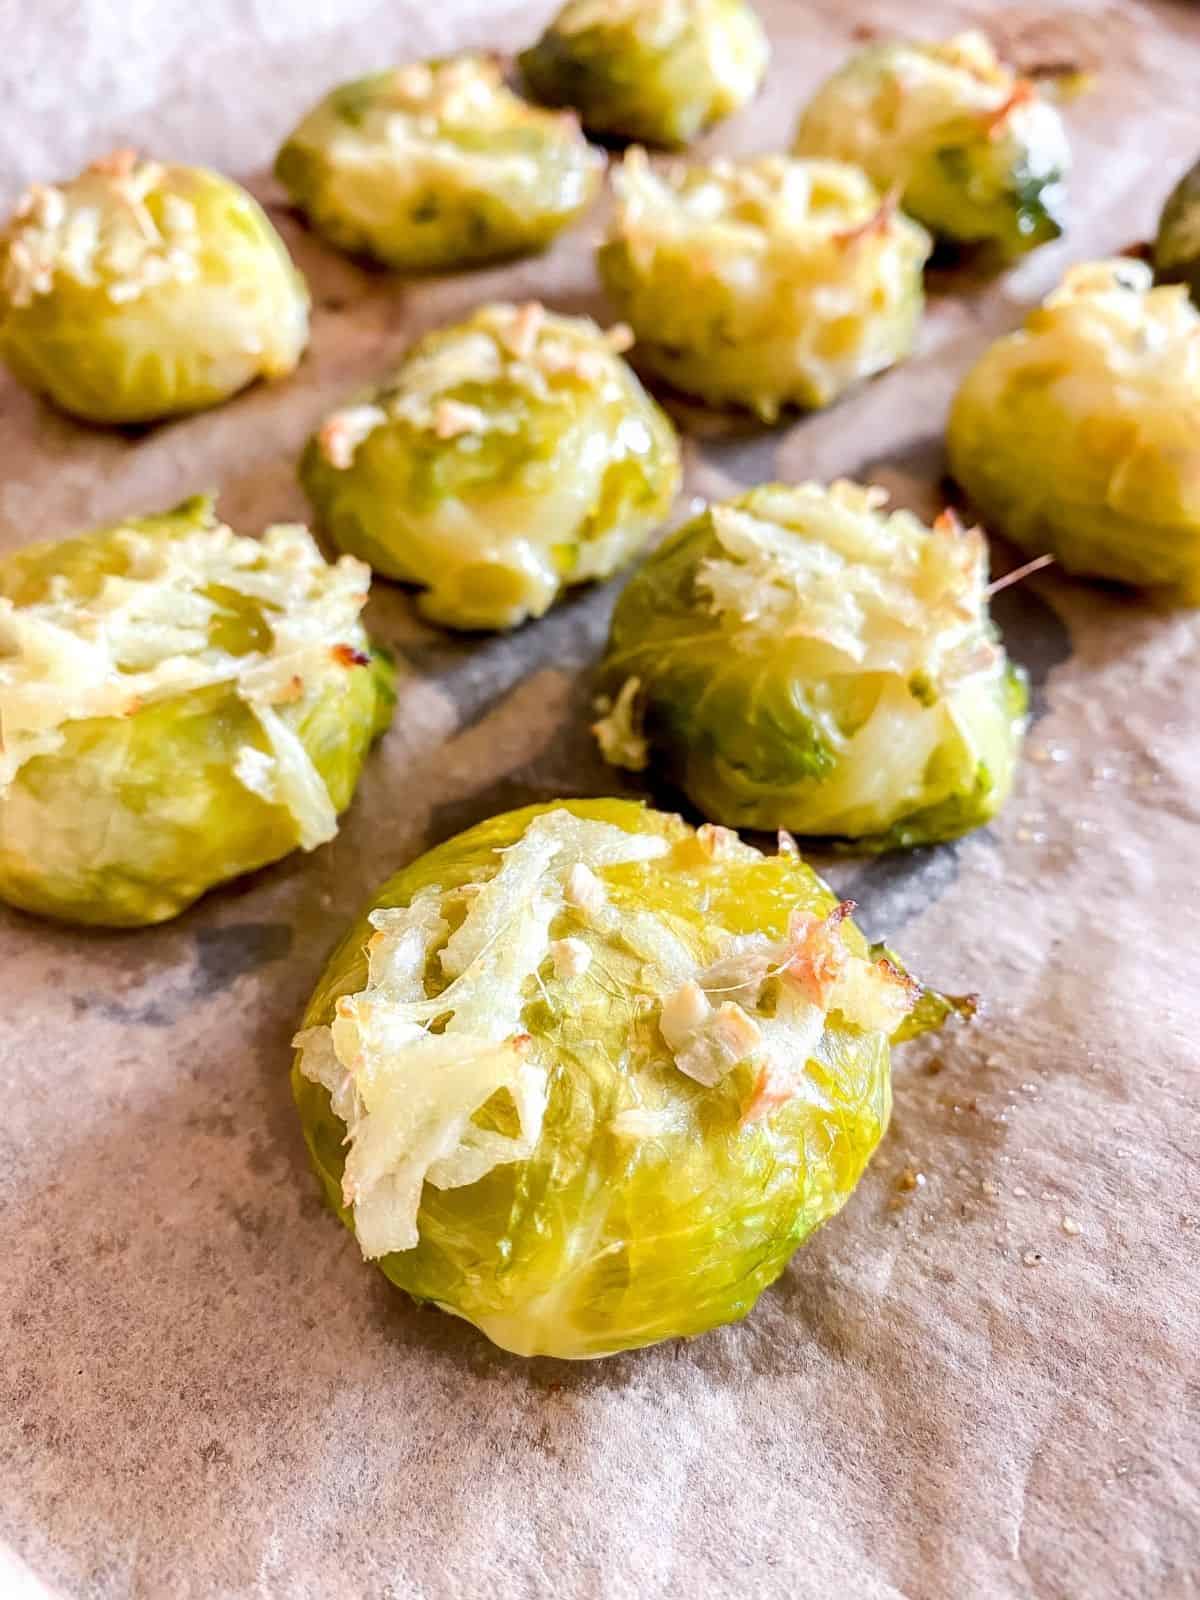 ginger brussels sprouts on a baking tray.